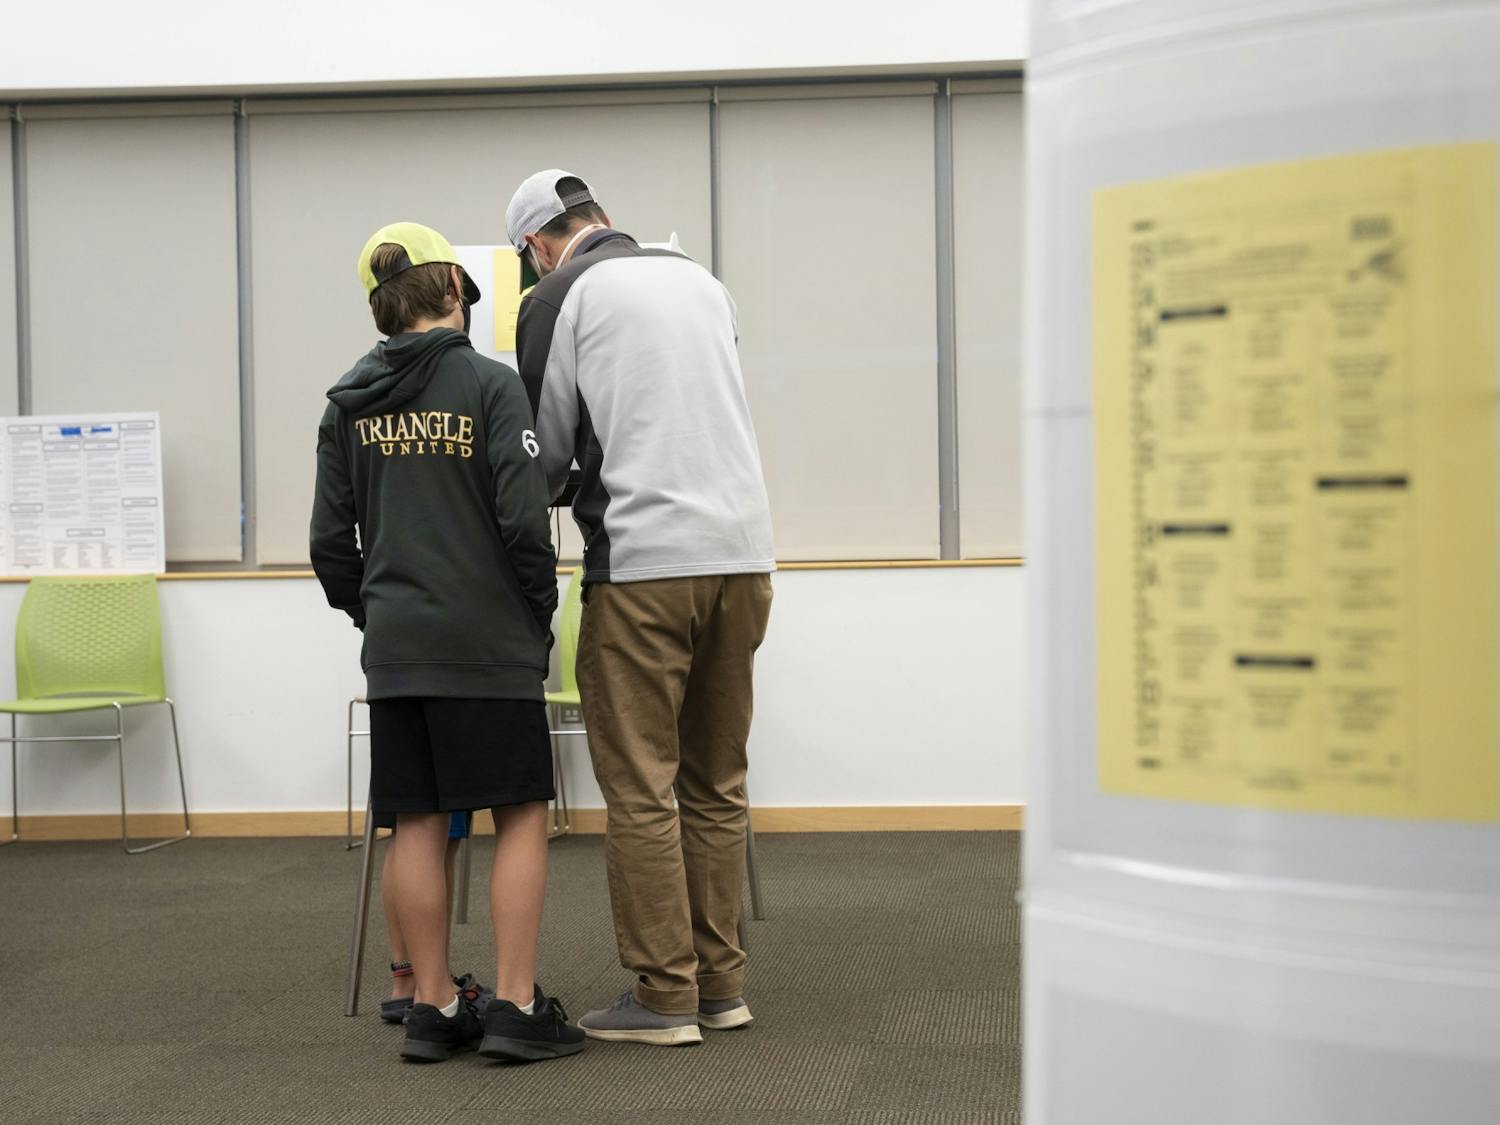 A father brings his sons to watch him vote at the Chapel Hill Public Library voting site in Chapel Hill, N.C. on Tuesday, Nov. 8, 2022, when the polls opened on midterm election day.